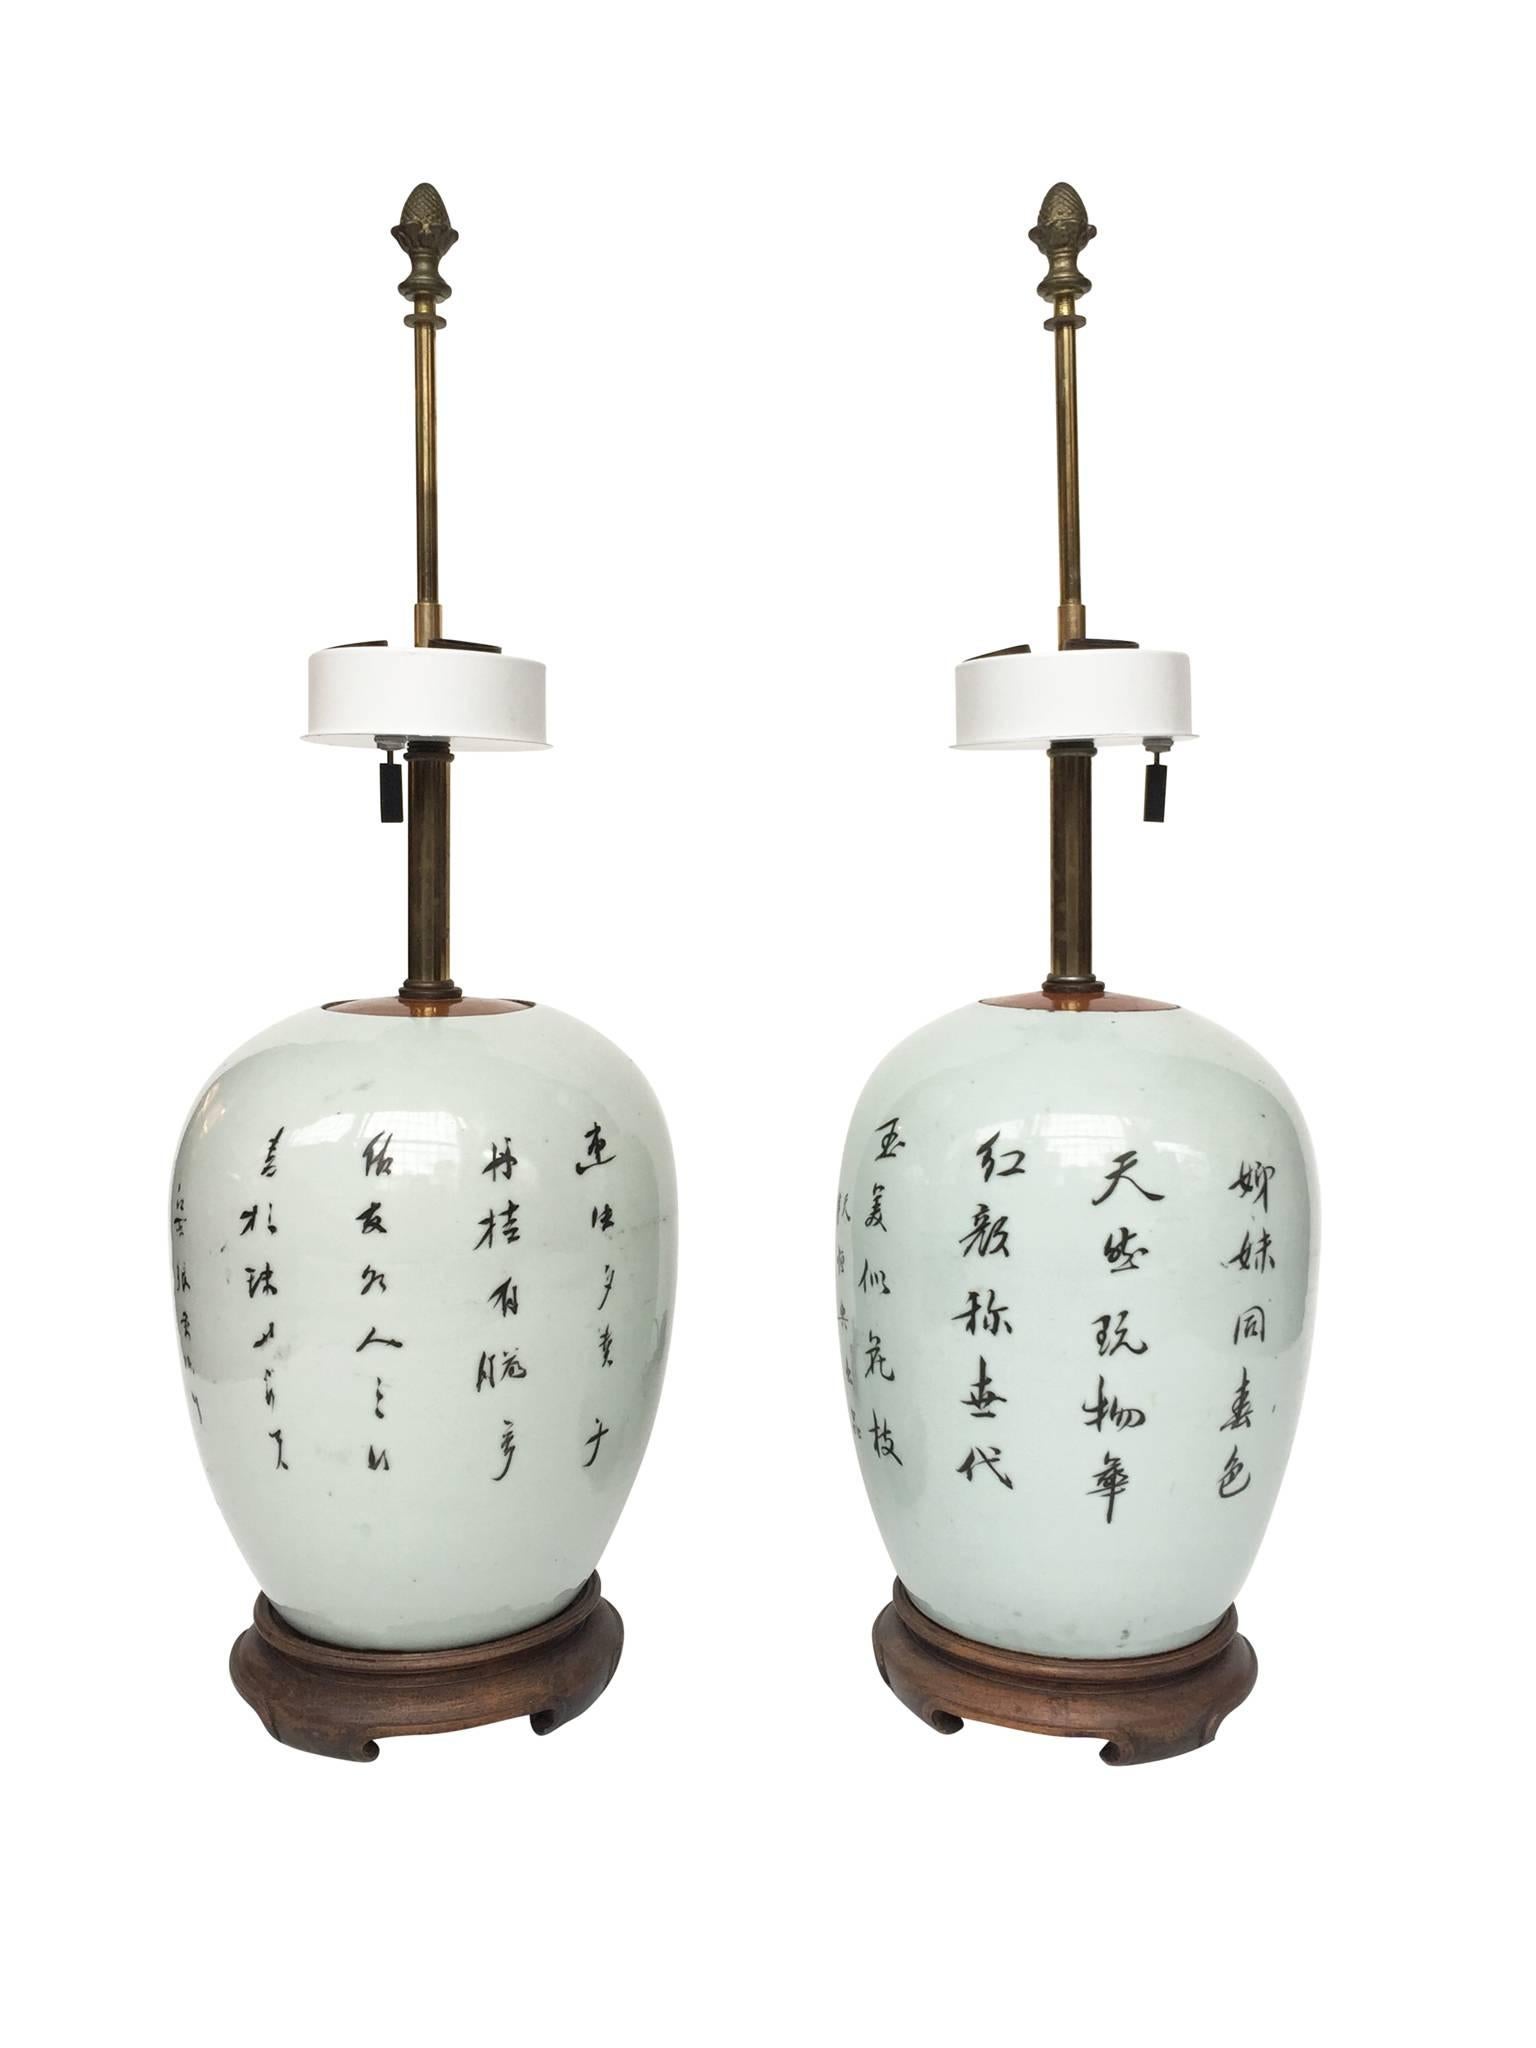 These two porcelain jar lamps have hand-painted figures in idyllic landscapes on one side, and hand-written calligraphy in black on the other. The jars are covered with wood in a glossy finish, while their bases are a reddish brown wood. The lamps